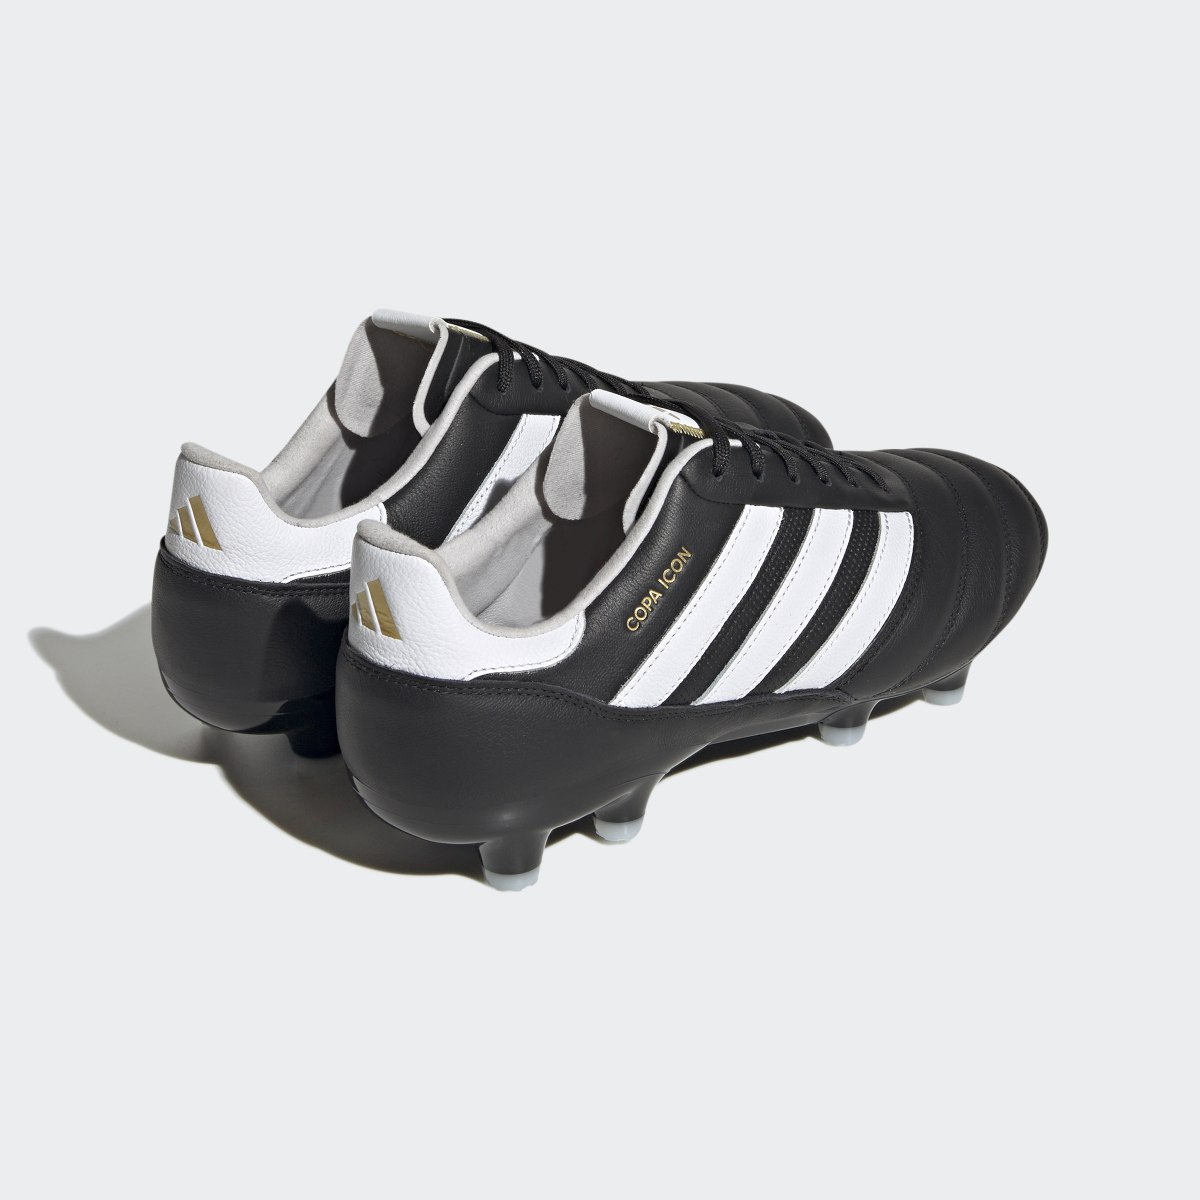 Adidas Copa Icon Firm Ground Boots. 9